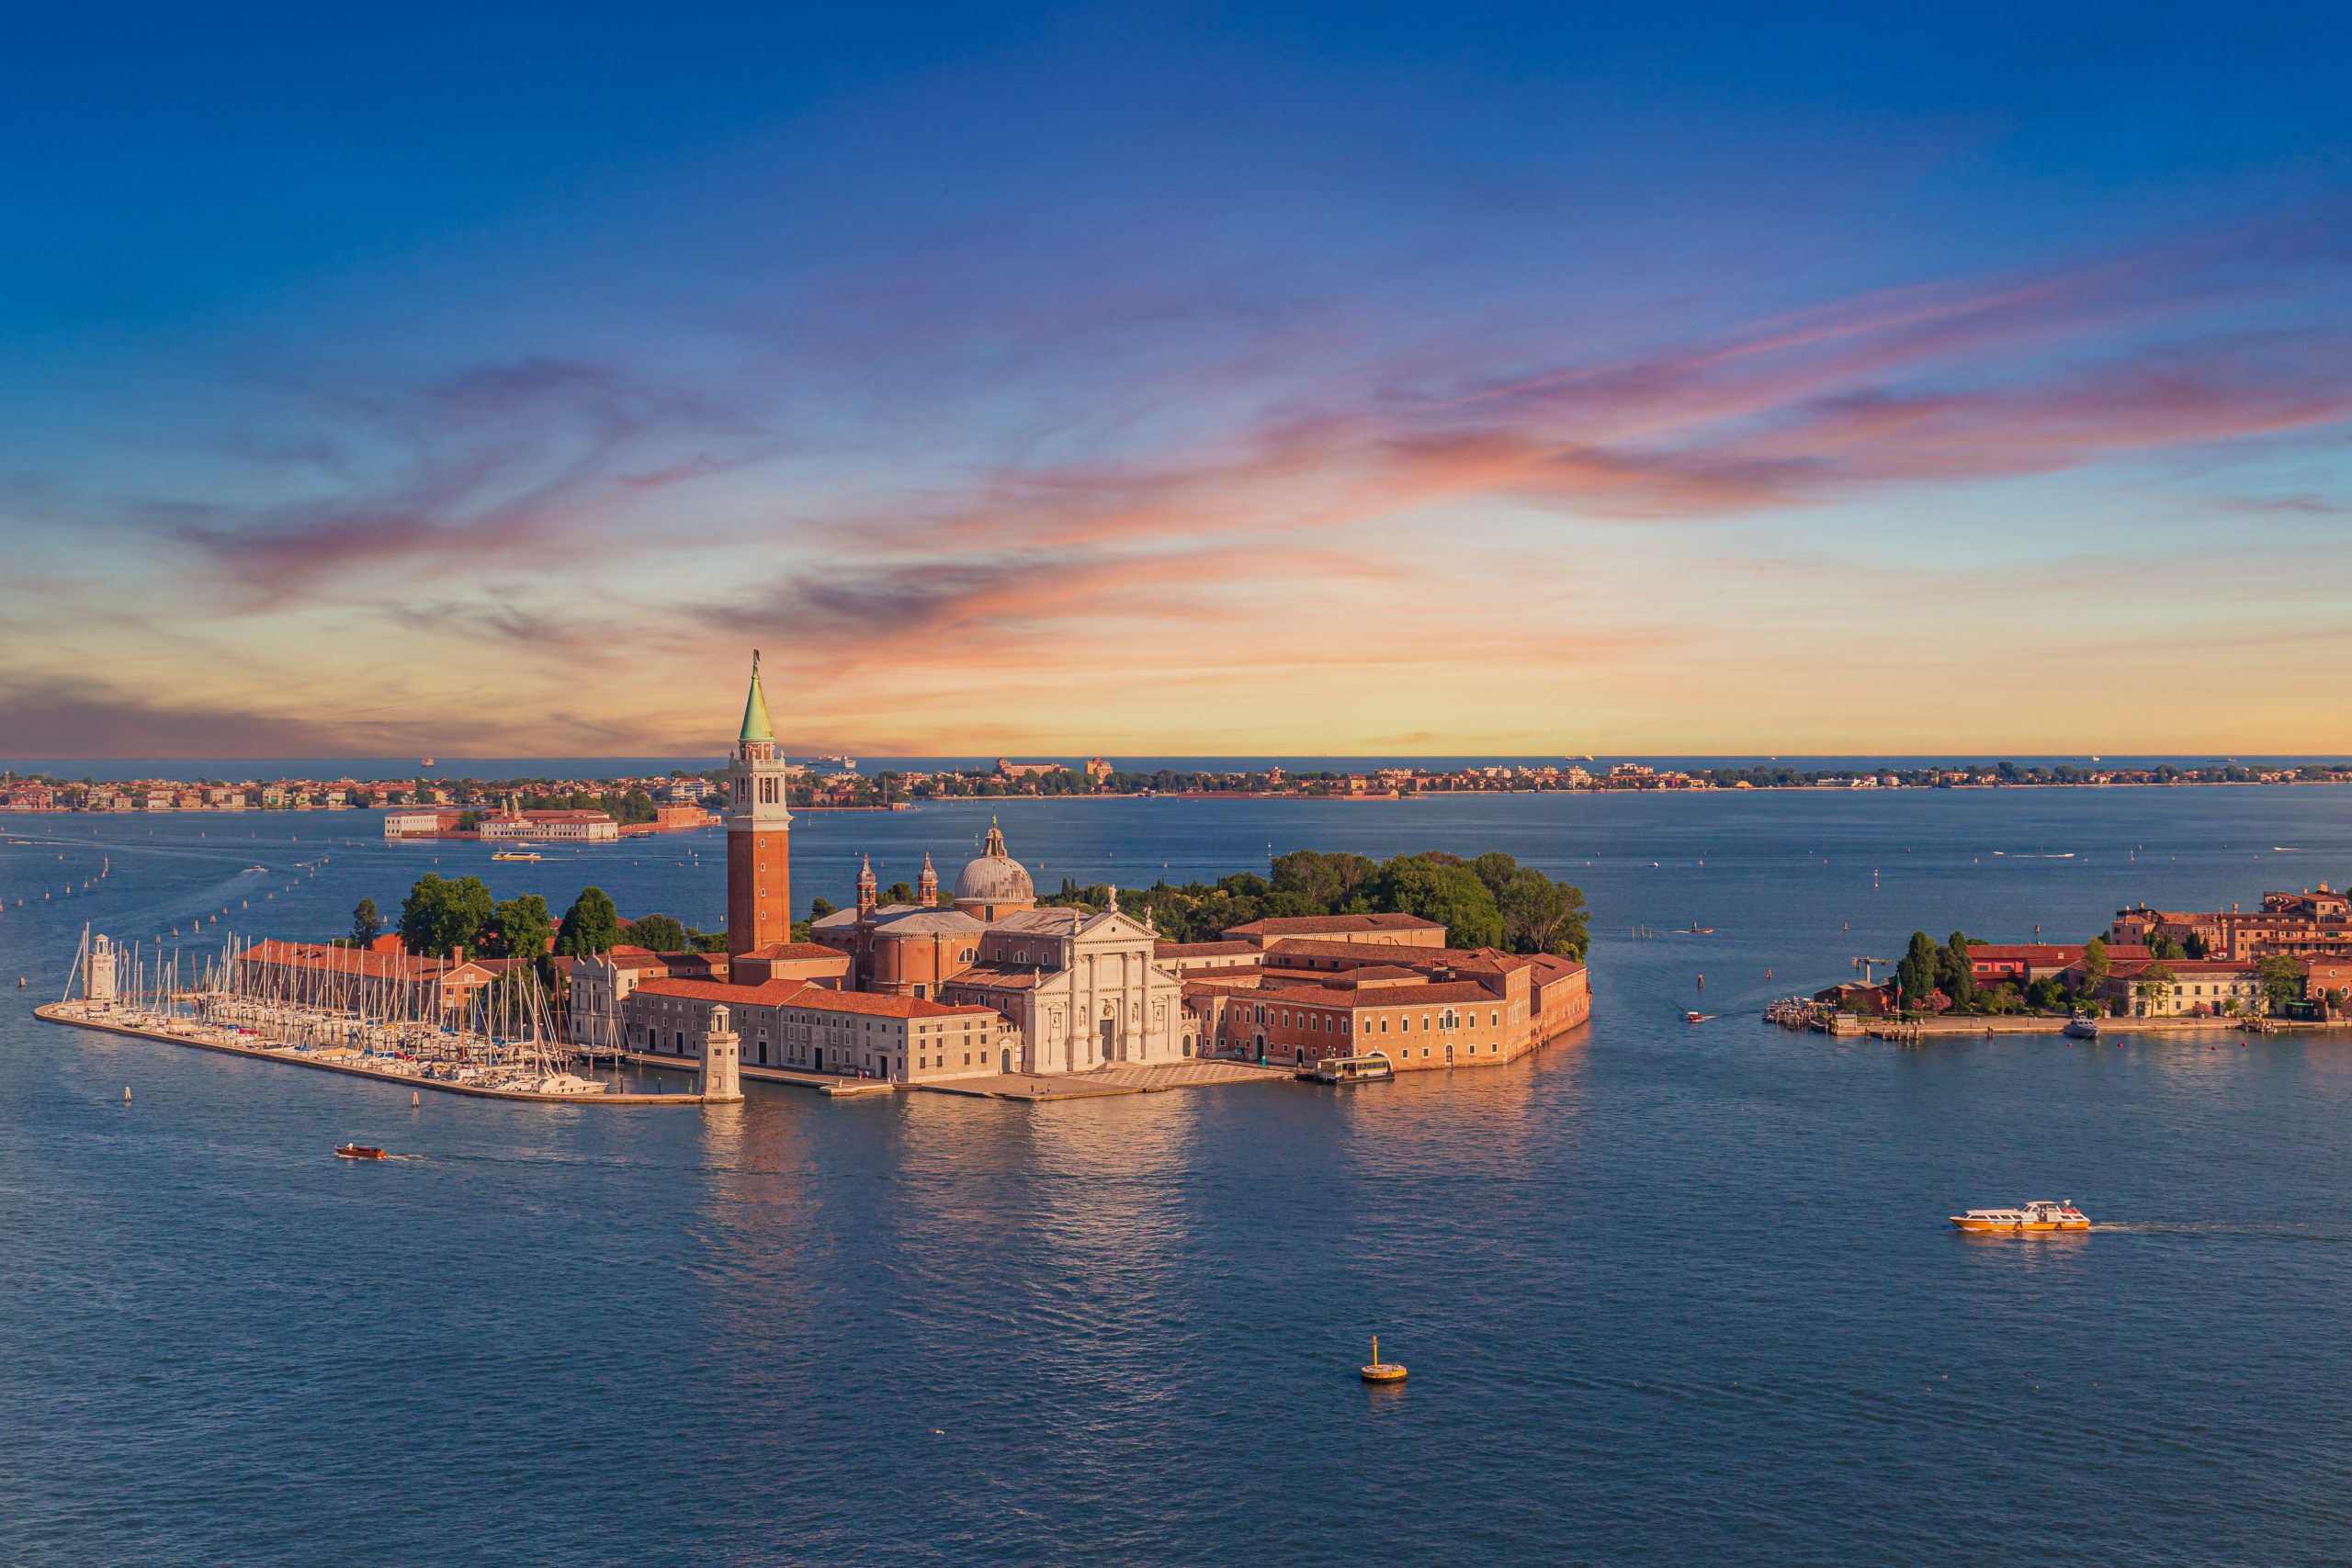 Church Of San Giorgio Maggiore Surrounded By Canals During The Sunset In Venice, Italy